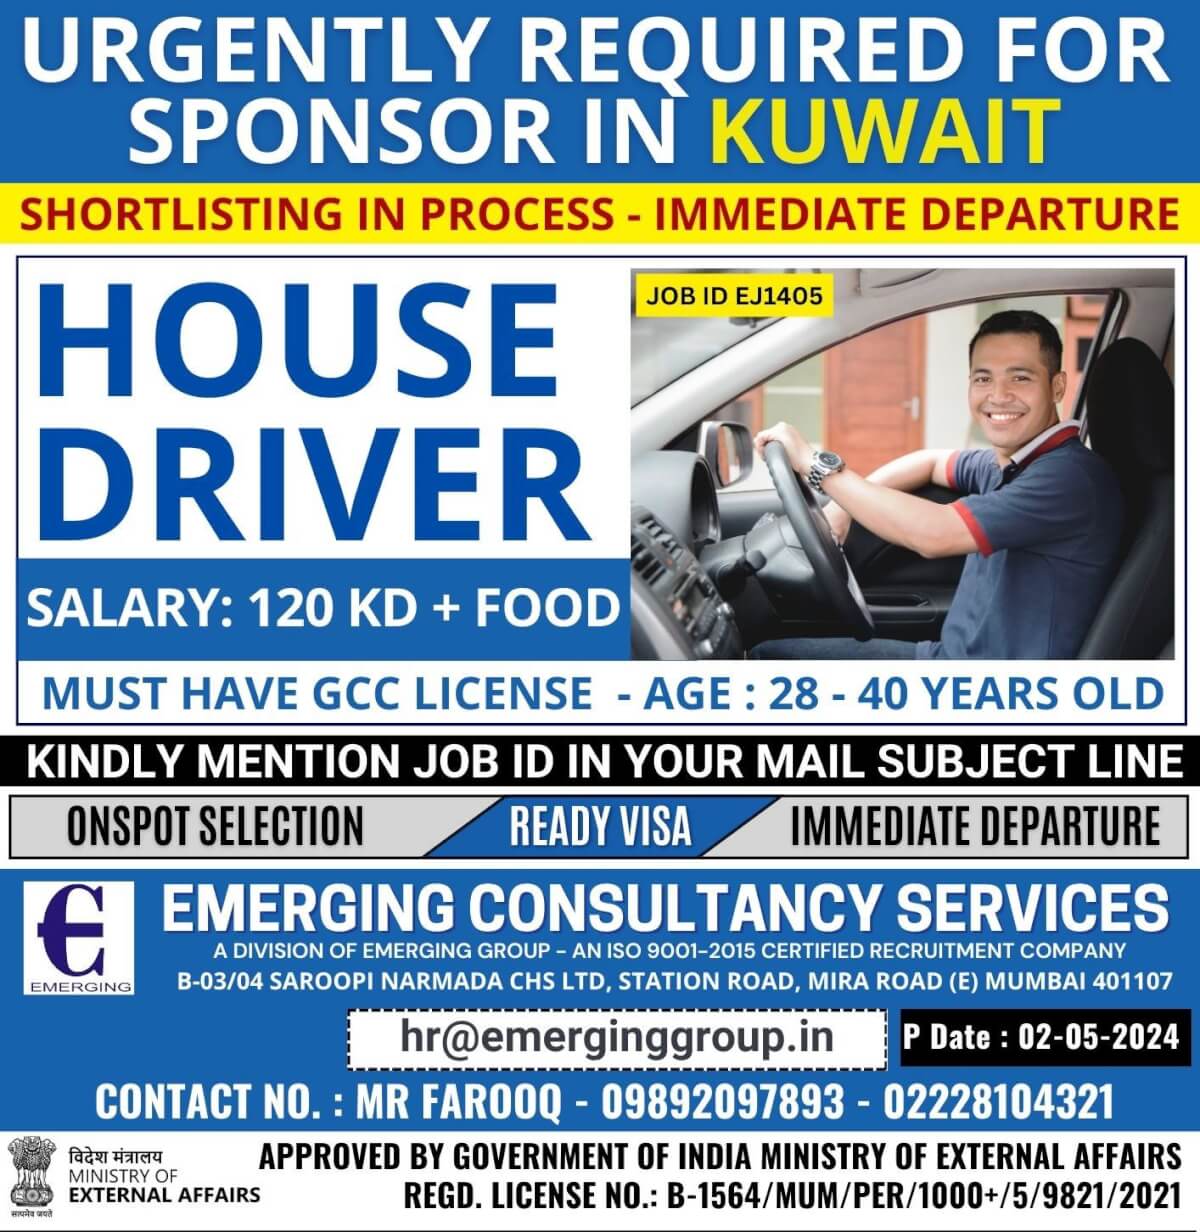 URGENTLY REQUIRED HOUSE DRIVER FOR SPONSOR IN KUWAIT - INTERVIEW THIS WEEK